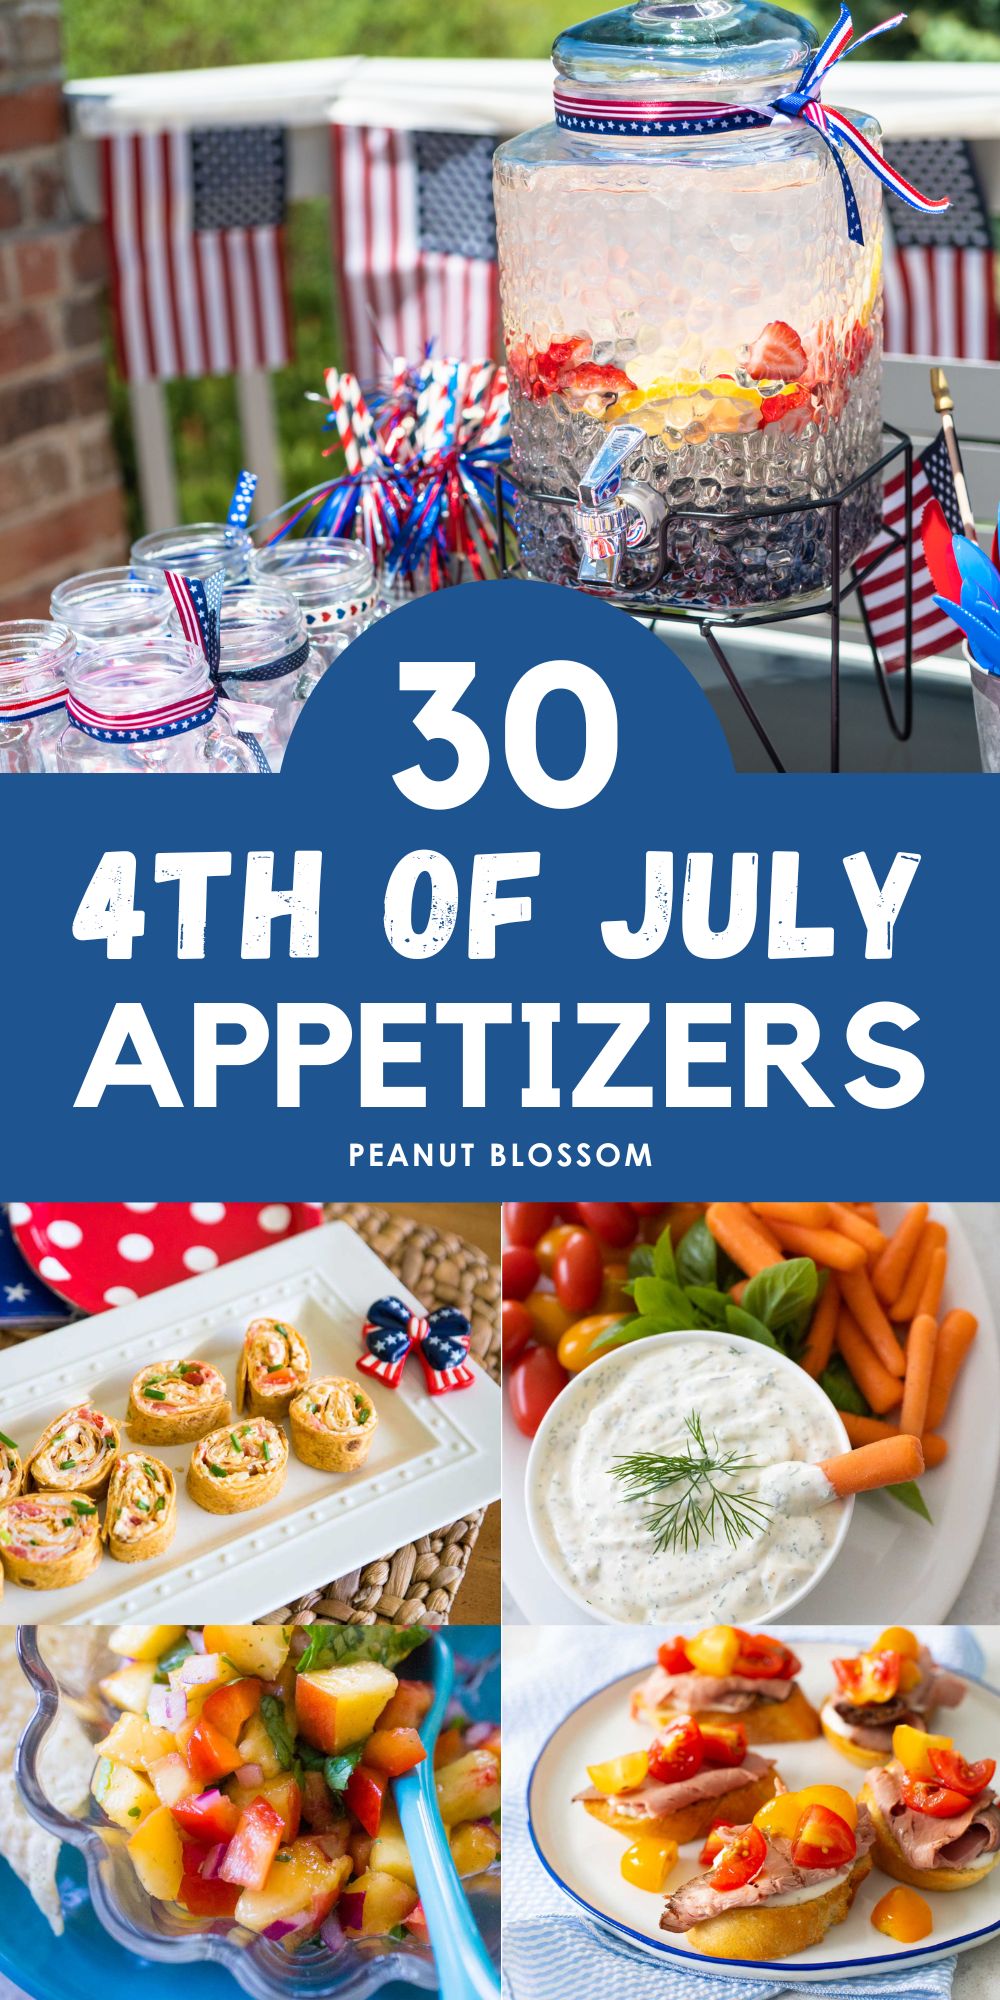 A photo collage shows a 4th of July party next to photos of easy appetizers to serve.